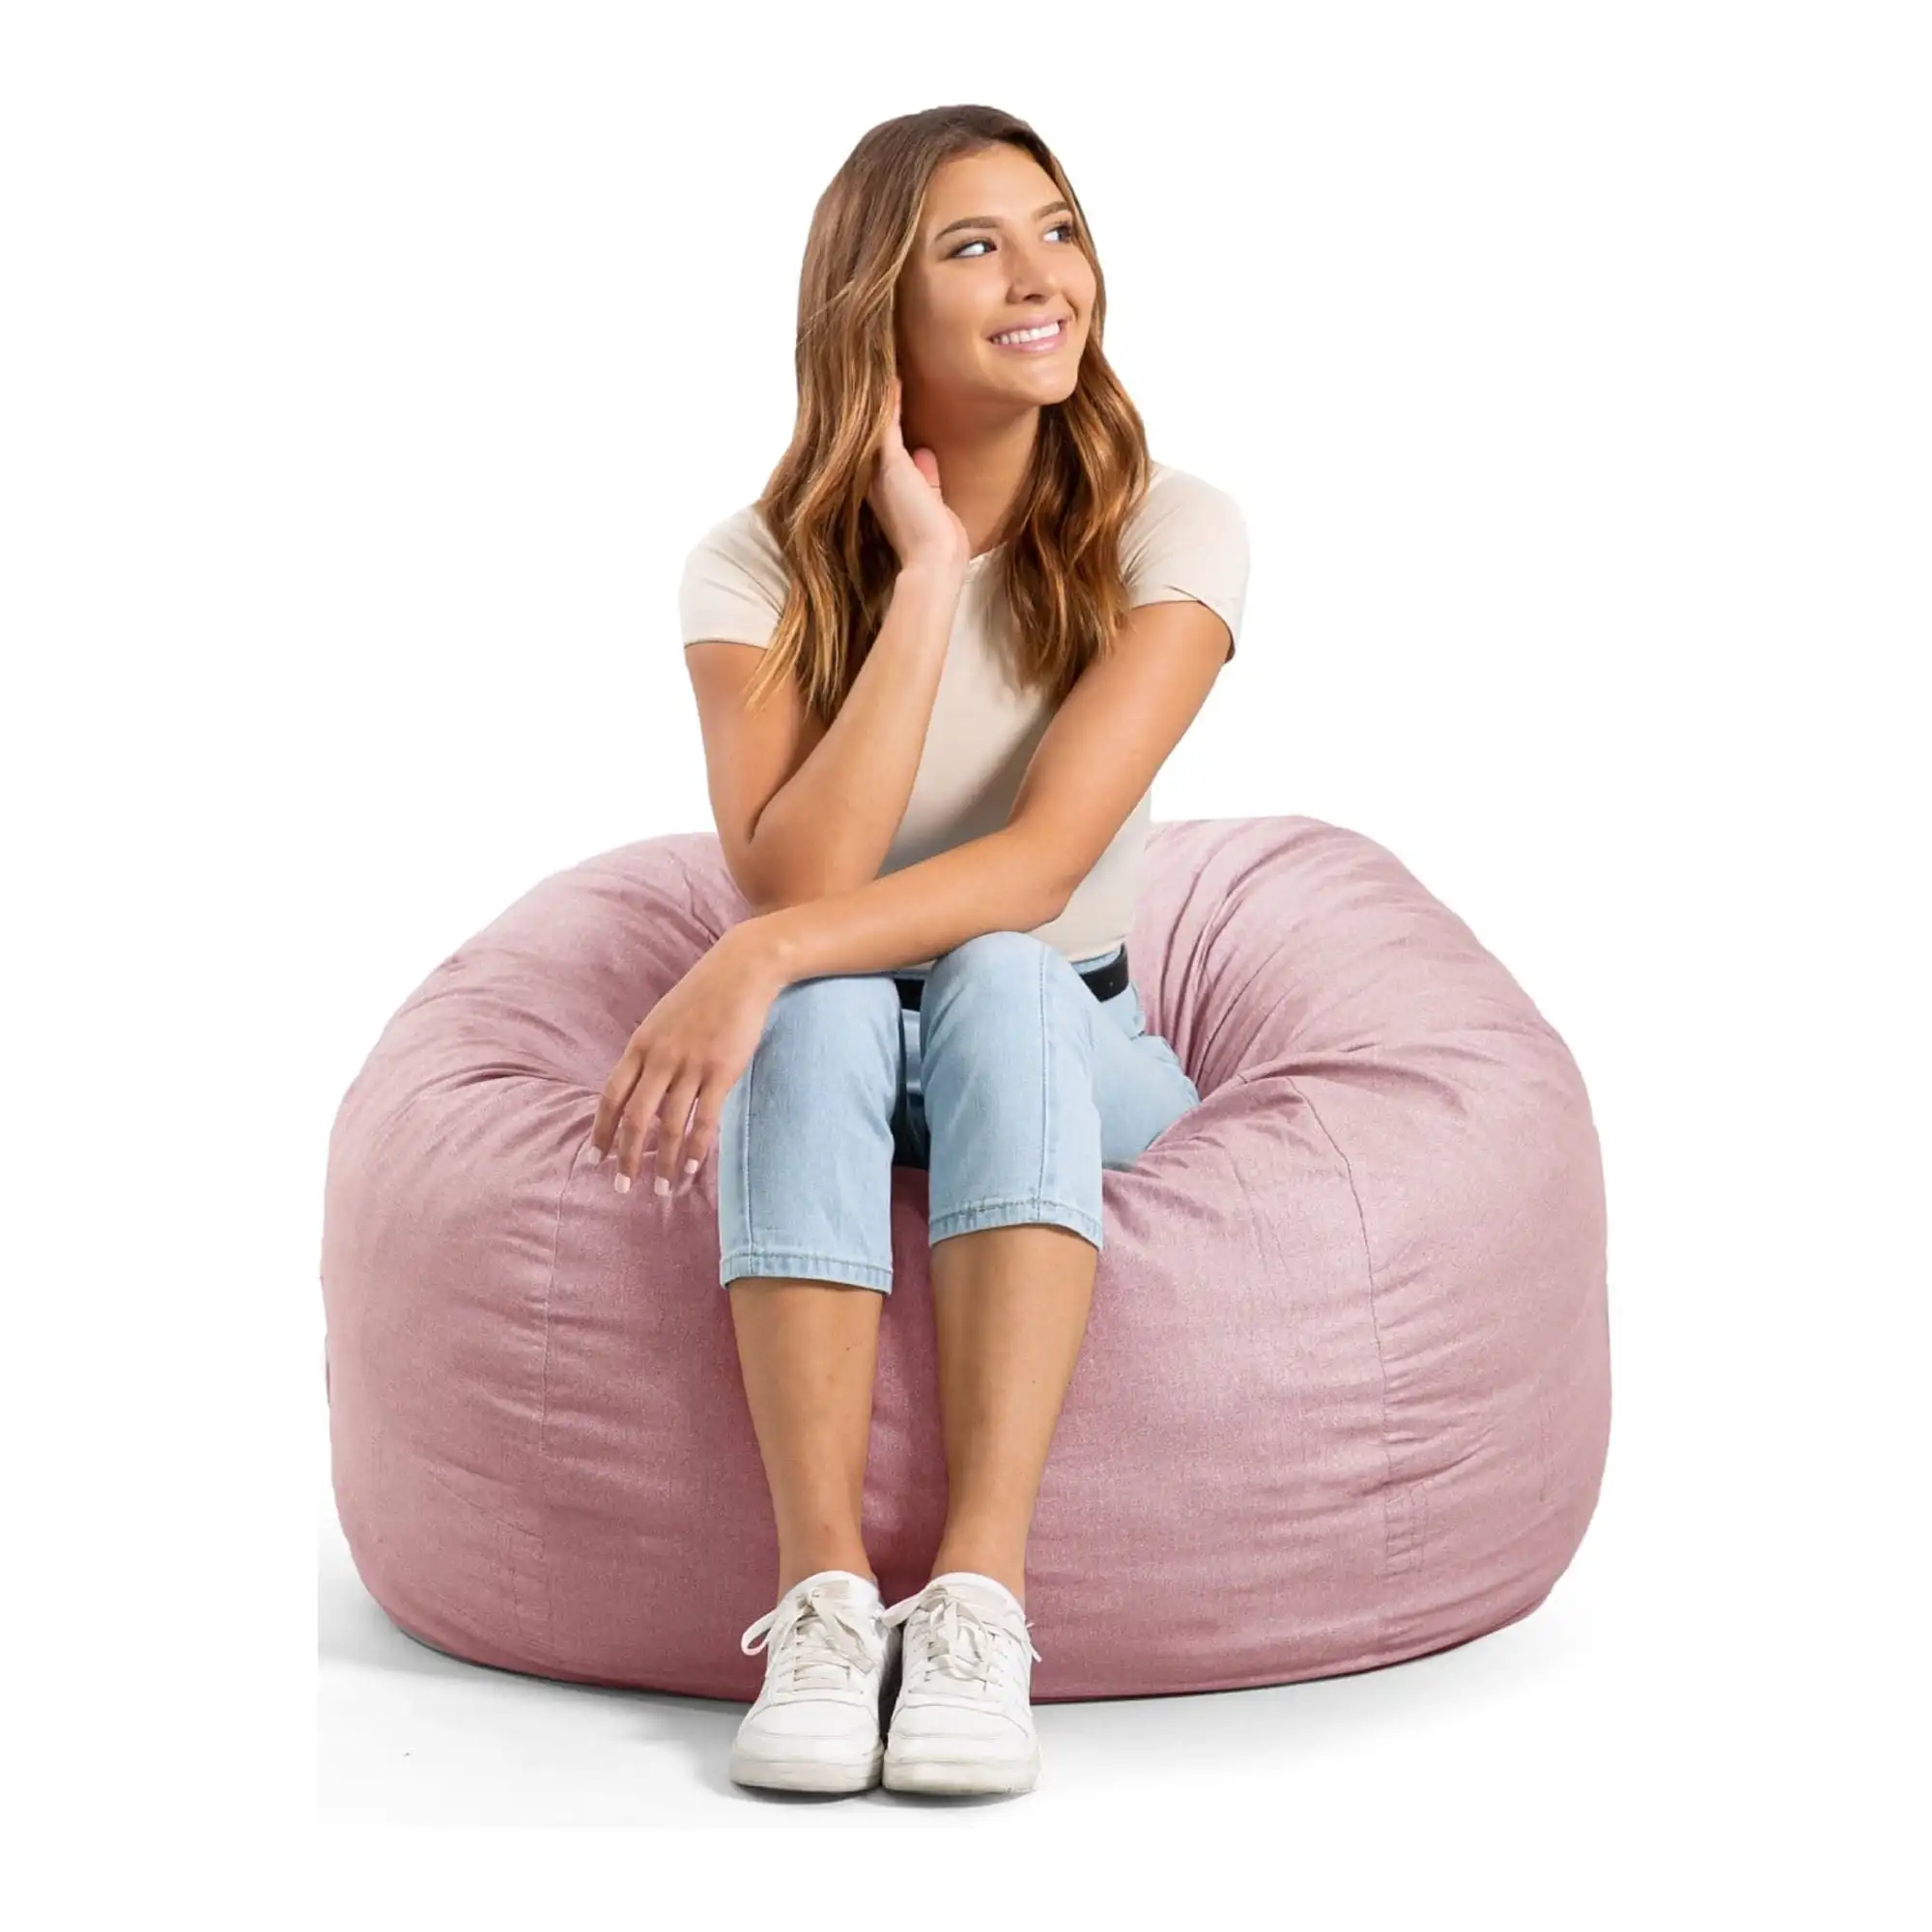 

Medium Foam Filled Bean Bag Chair for Adults/Kids Lazy Floor Sofa Couch w/ Woven Polyester Removable Cover - 3 Foot, Desert Rose